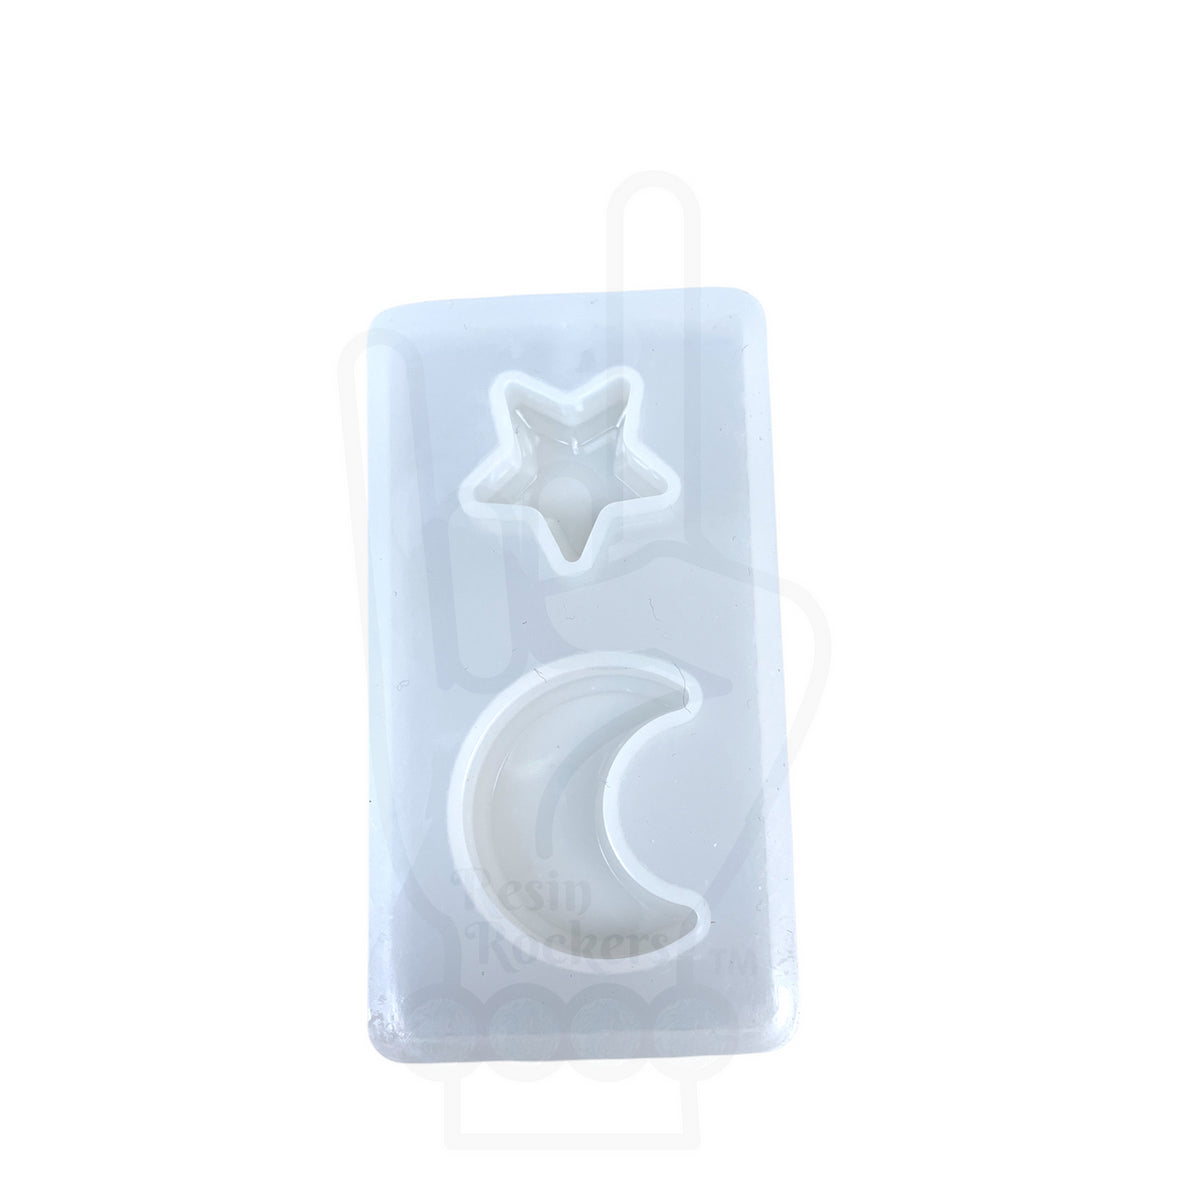 UV Safe Crescent Moon &amp; Star Charm Duo Silicone Mold for UV or Epoxy Resin Art Single